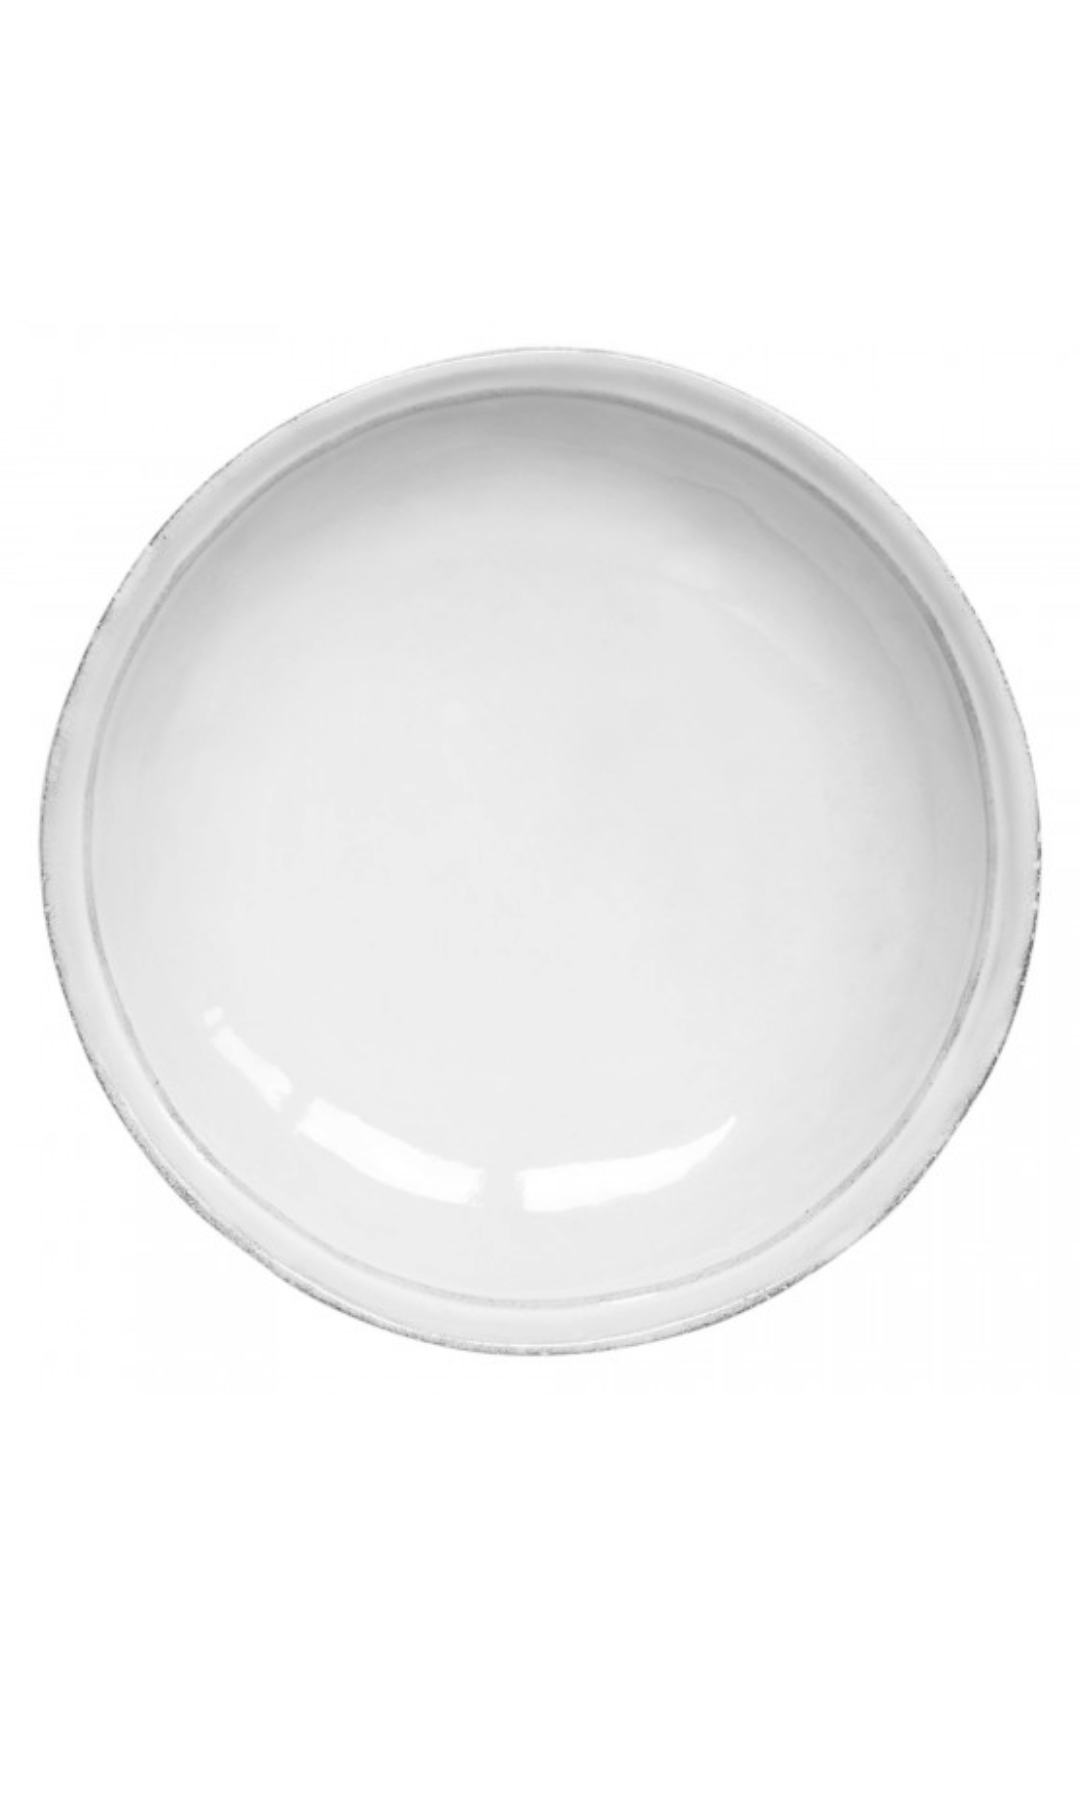 Large Simple Soup Plate